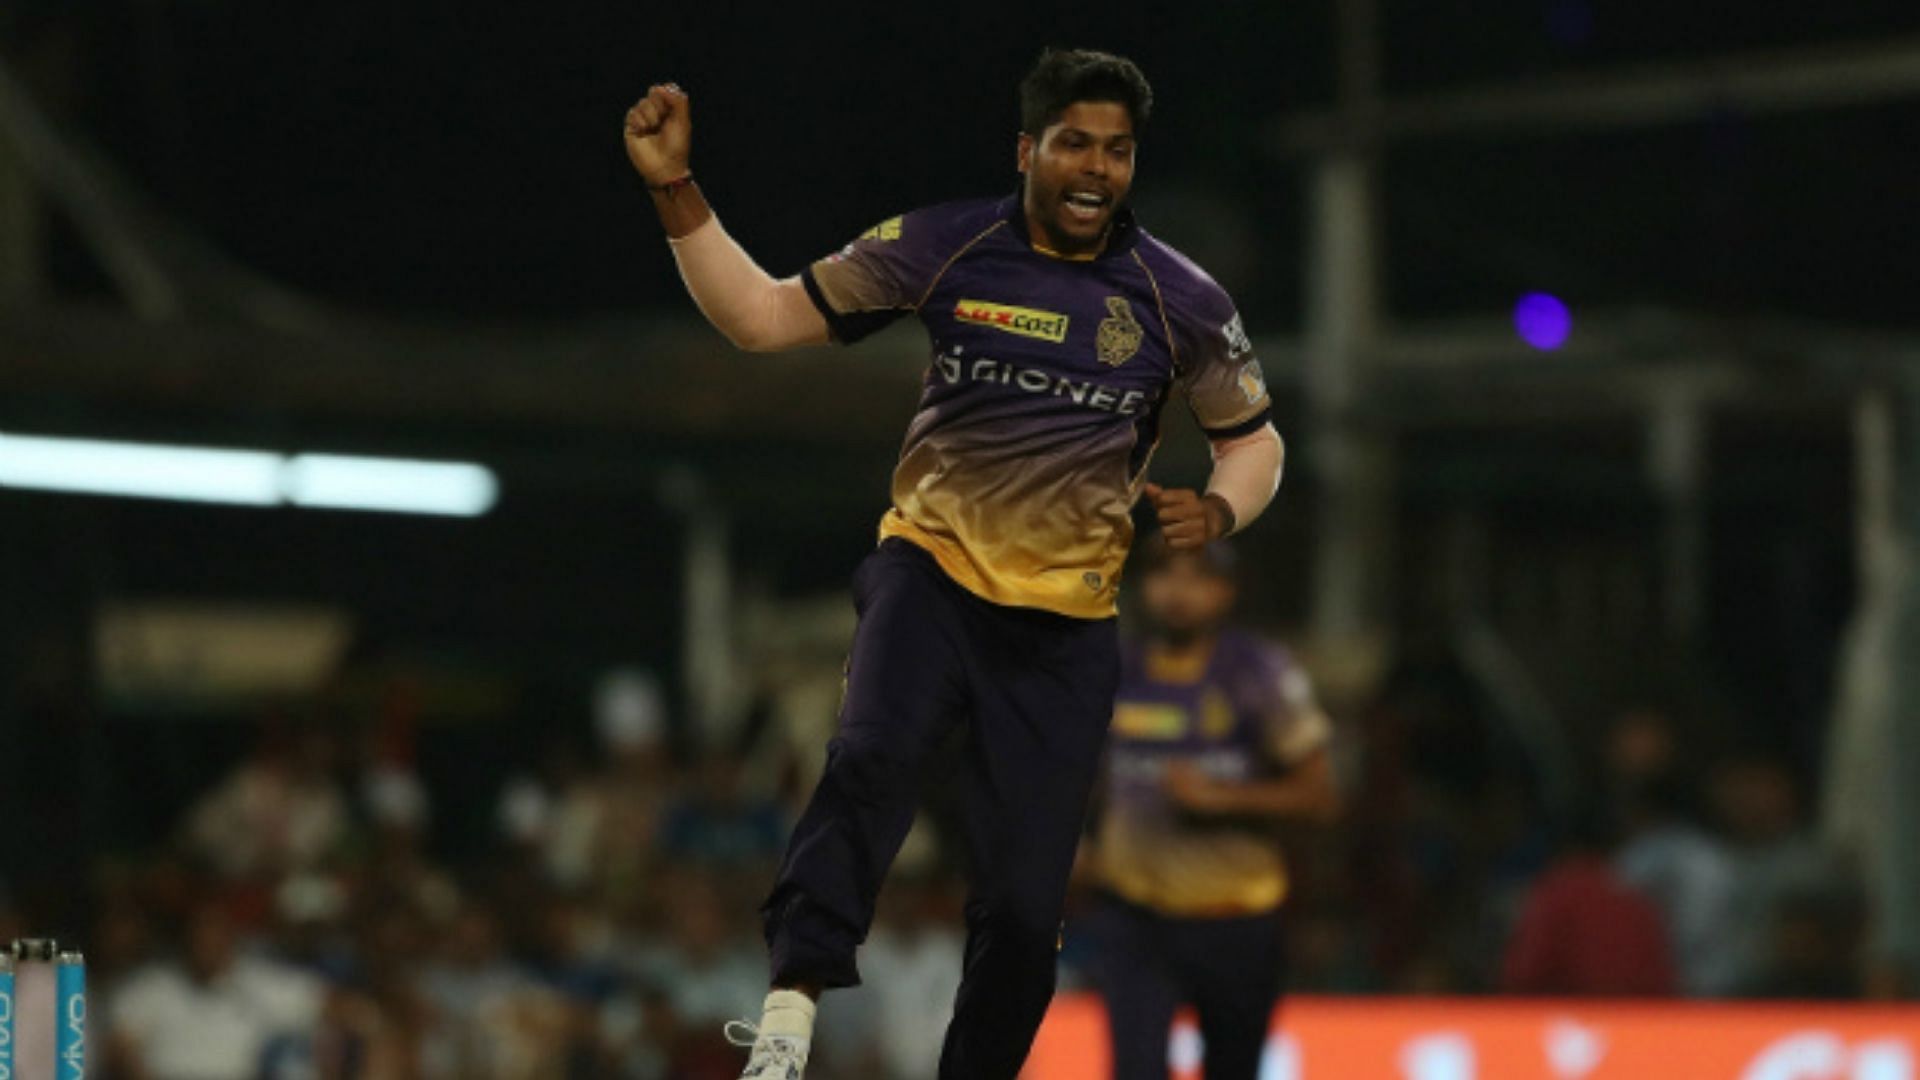 Yadav previously won an IPL title with KKR in 2014